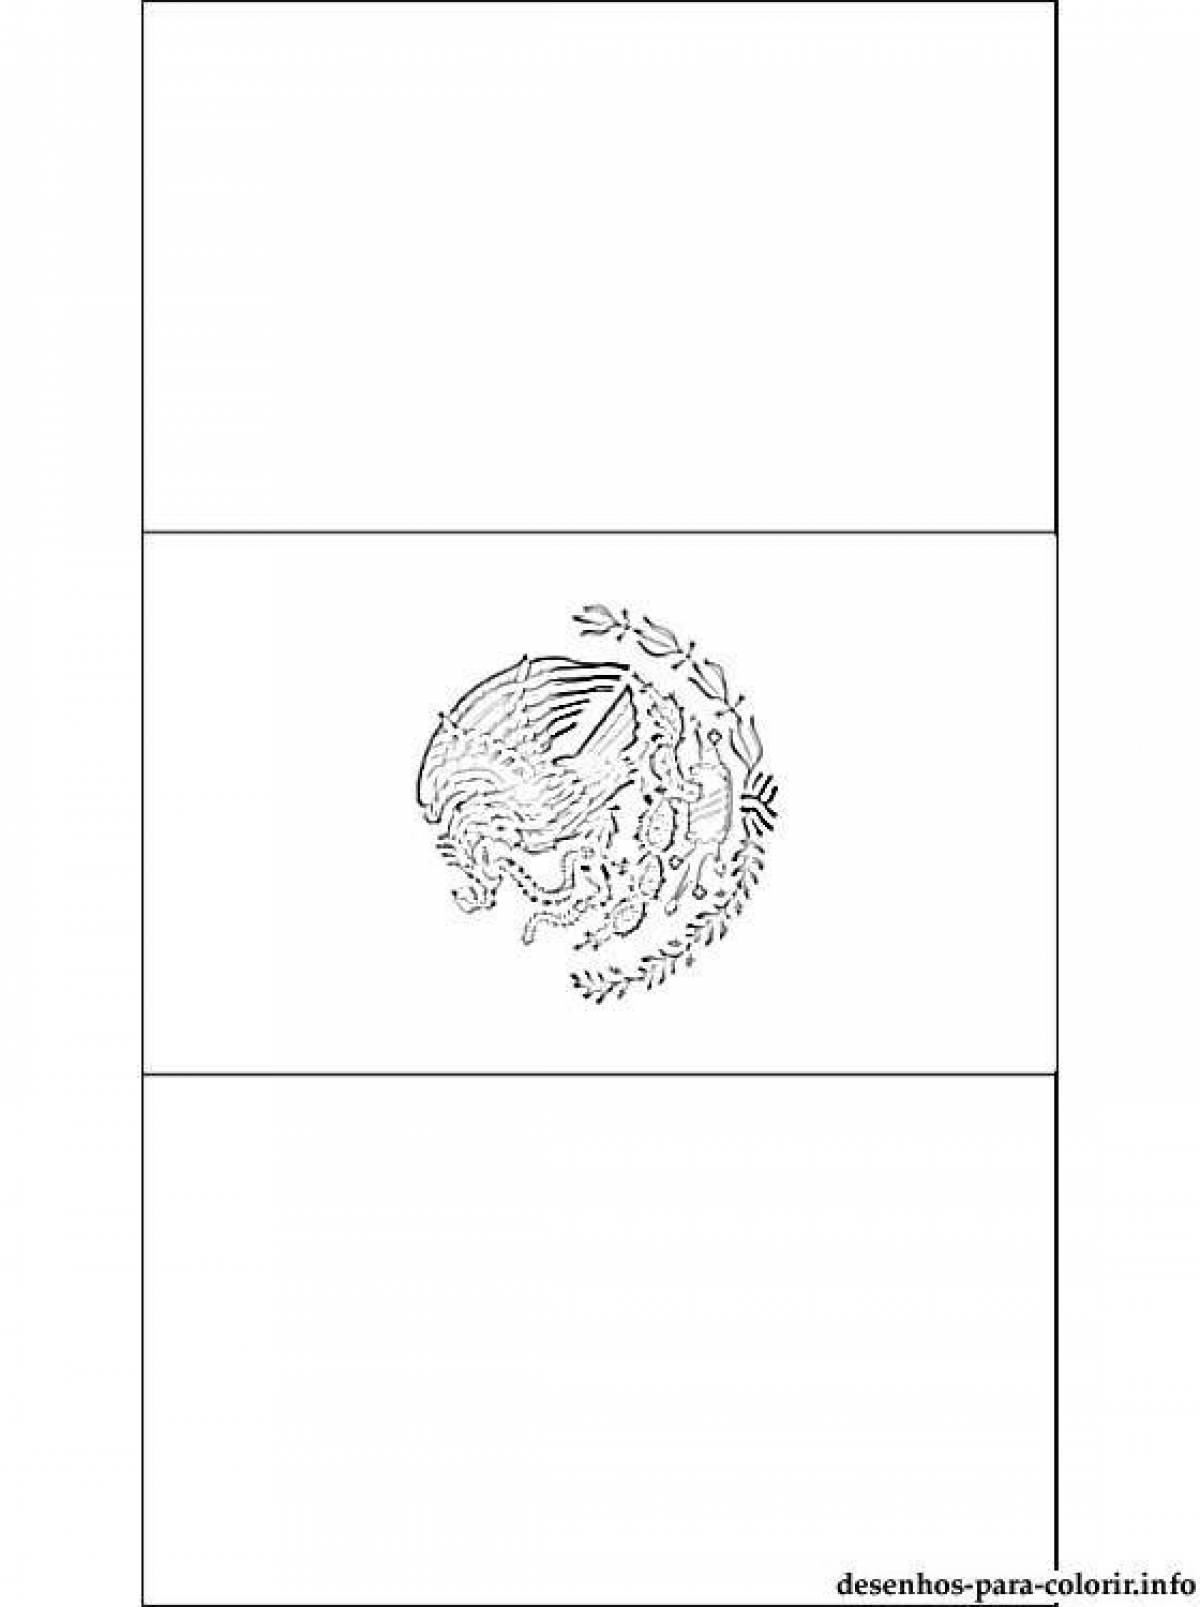 Intriguing mexico flag coloring page